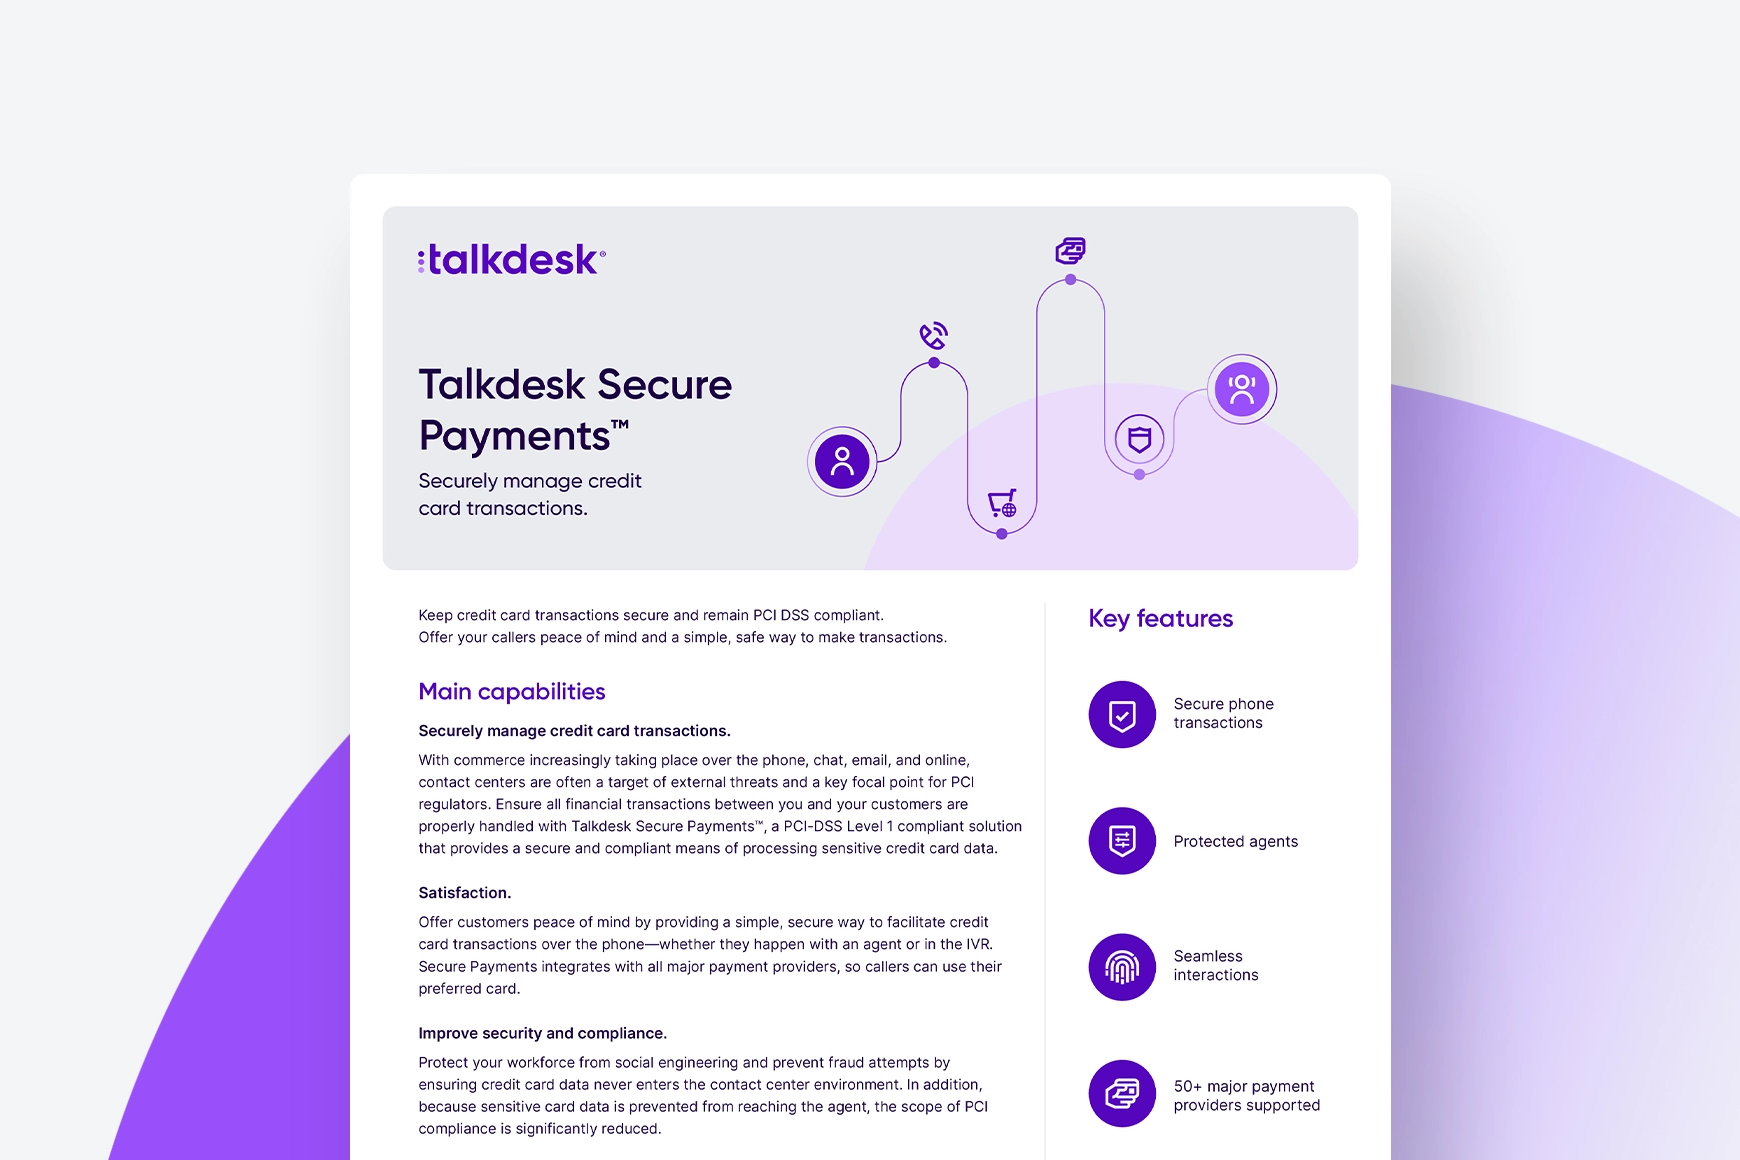 Talkdesk Secure Payments